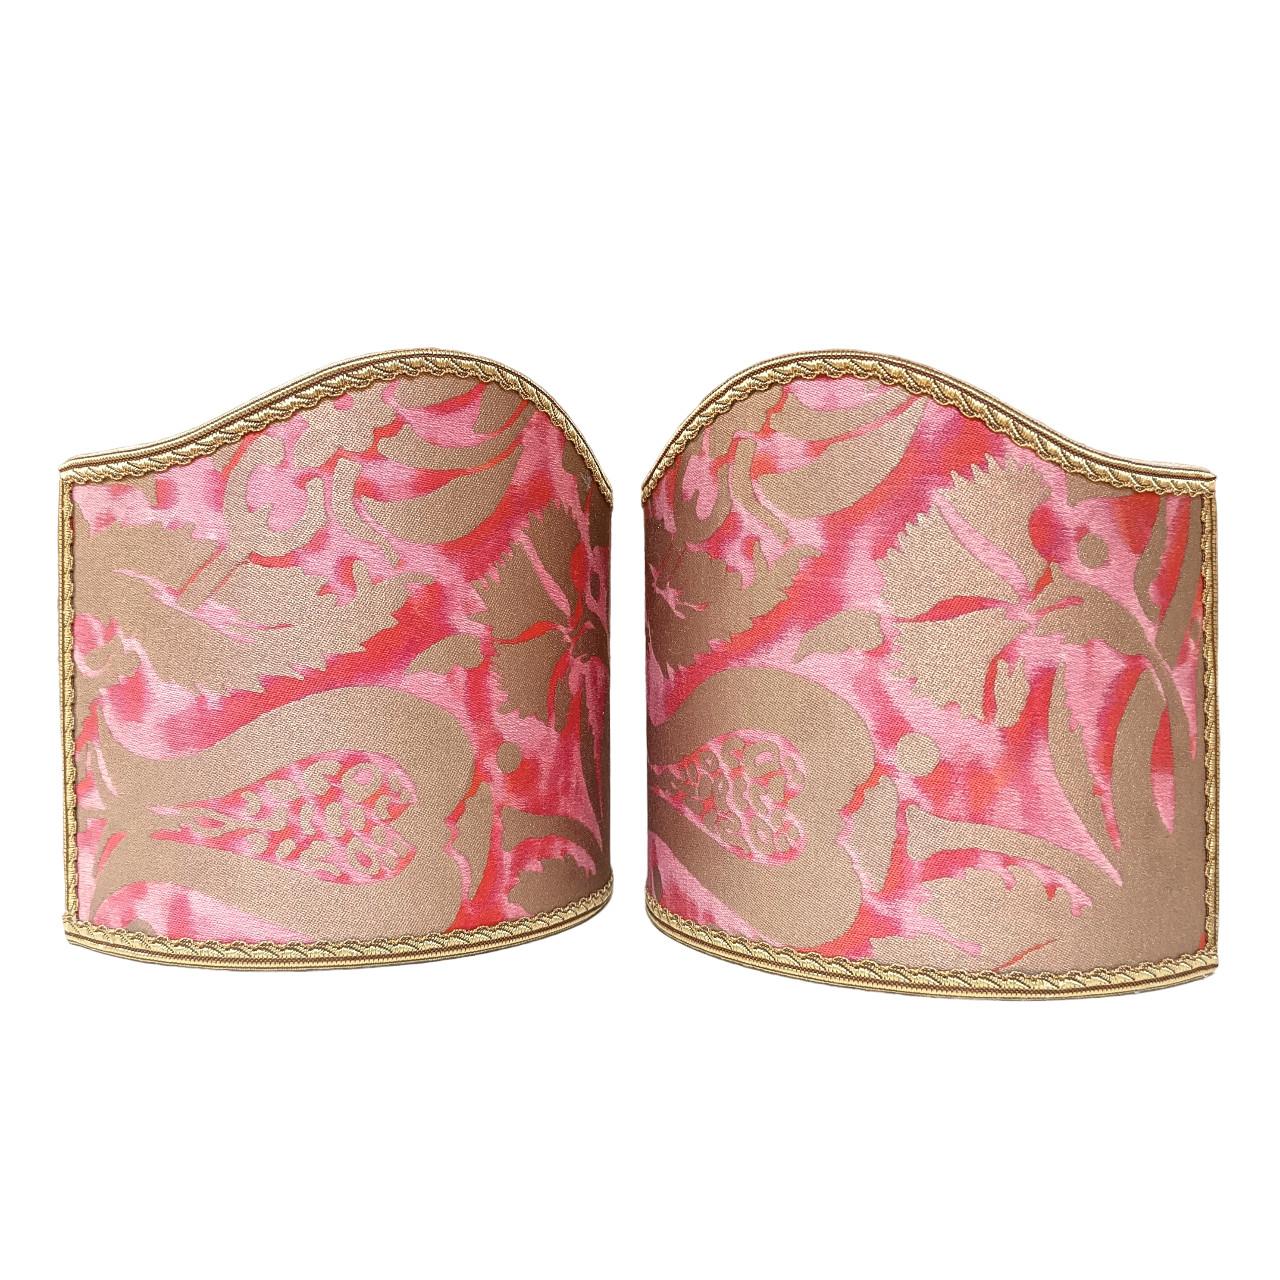 This pretty set of 2 clip on wall sconce lampshades with a fitting that clips over the light bulb is handmade using Fortuny fabric - Pomegranate pattern - in coral haze & silvery gold color, finished with gold trim. Suitable for candelabra bulbs